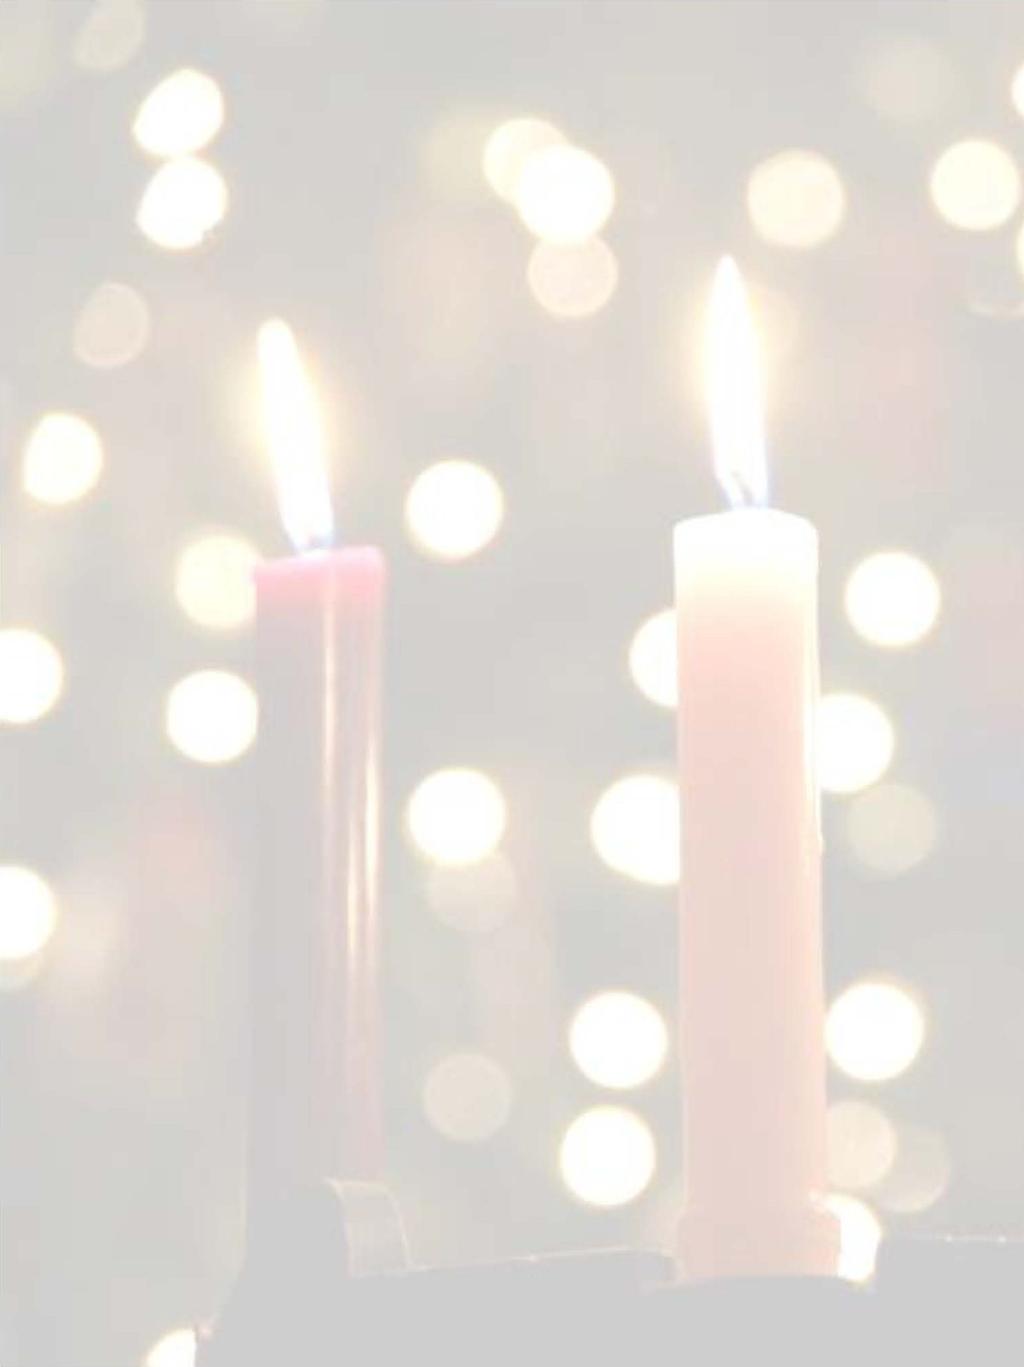 ADVENT DATES December SUNDAY, DECEMBER 2 Mission Marketplace Worship 8:00, 9:30, and 11:00 a.m., Theme: Hope Adult Ed Classes, 8:00, 9:30, and 11:00 a.m. Families with Children Advent Celebration 9:30 and 11:00 a.